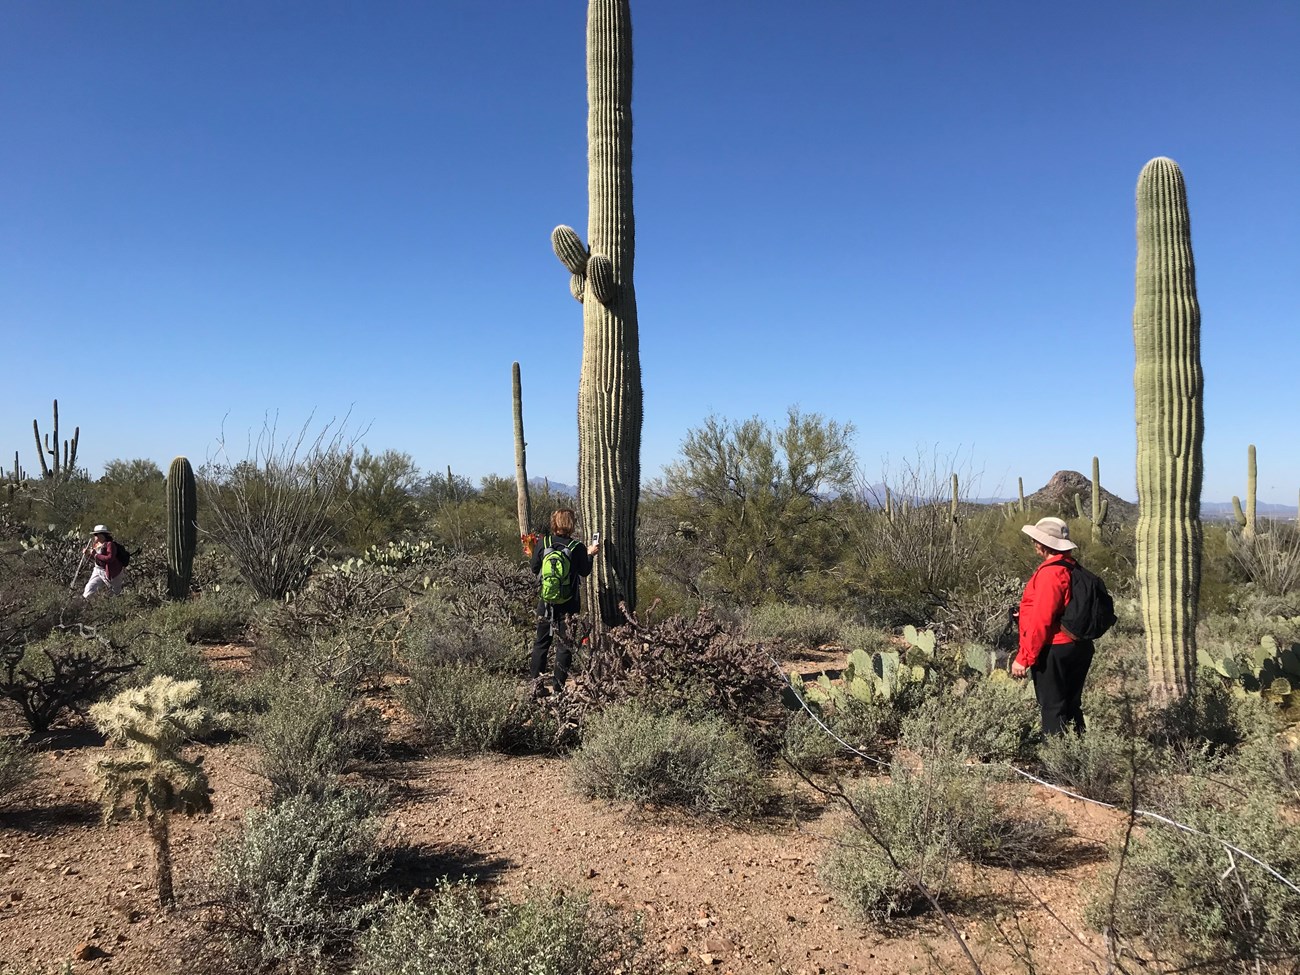 A volunteer using a GPS device to find the coordinates of a saguaro.